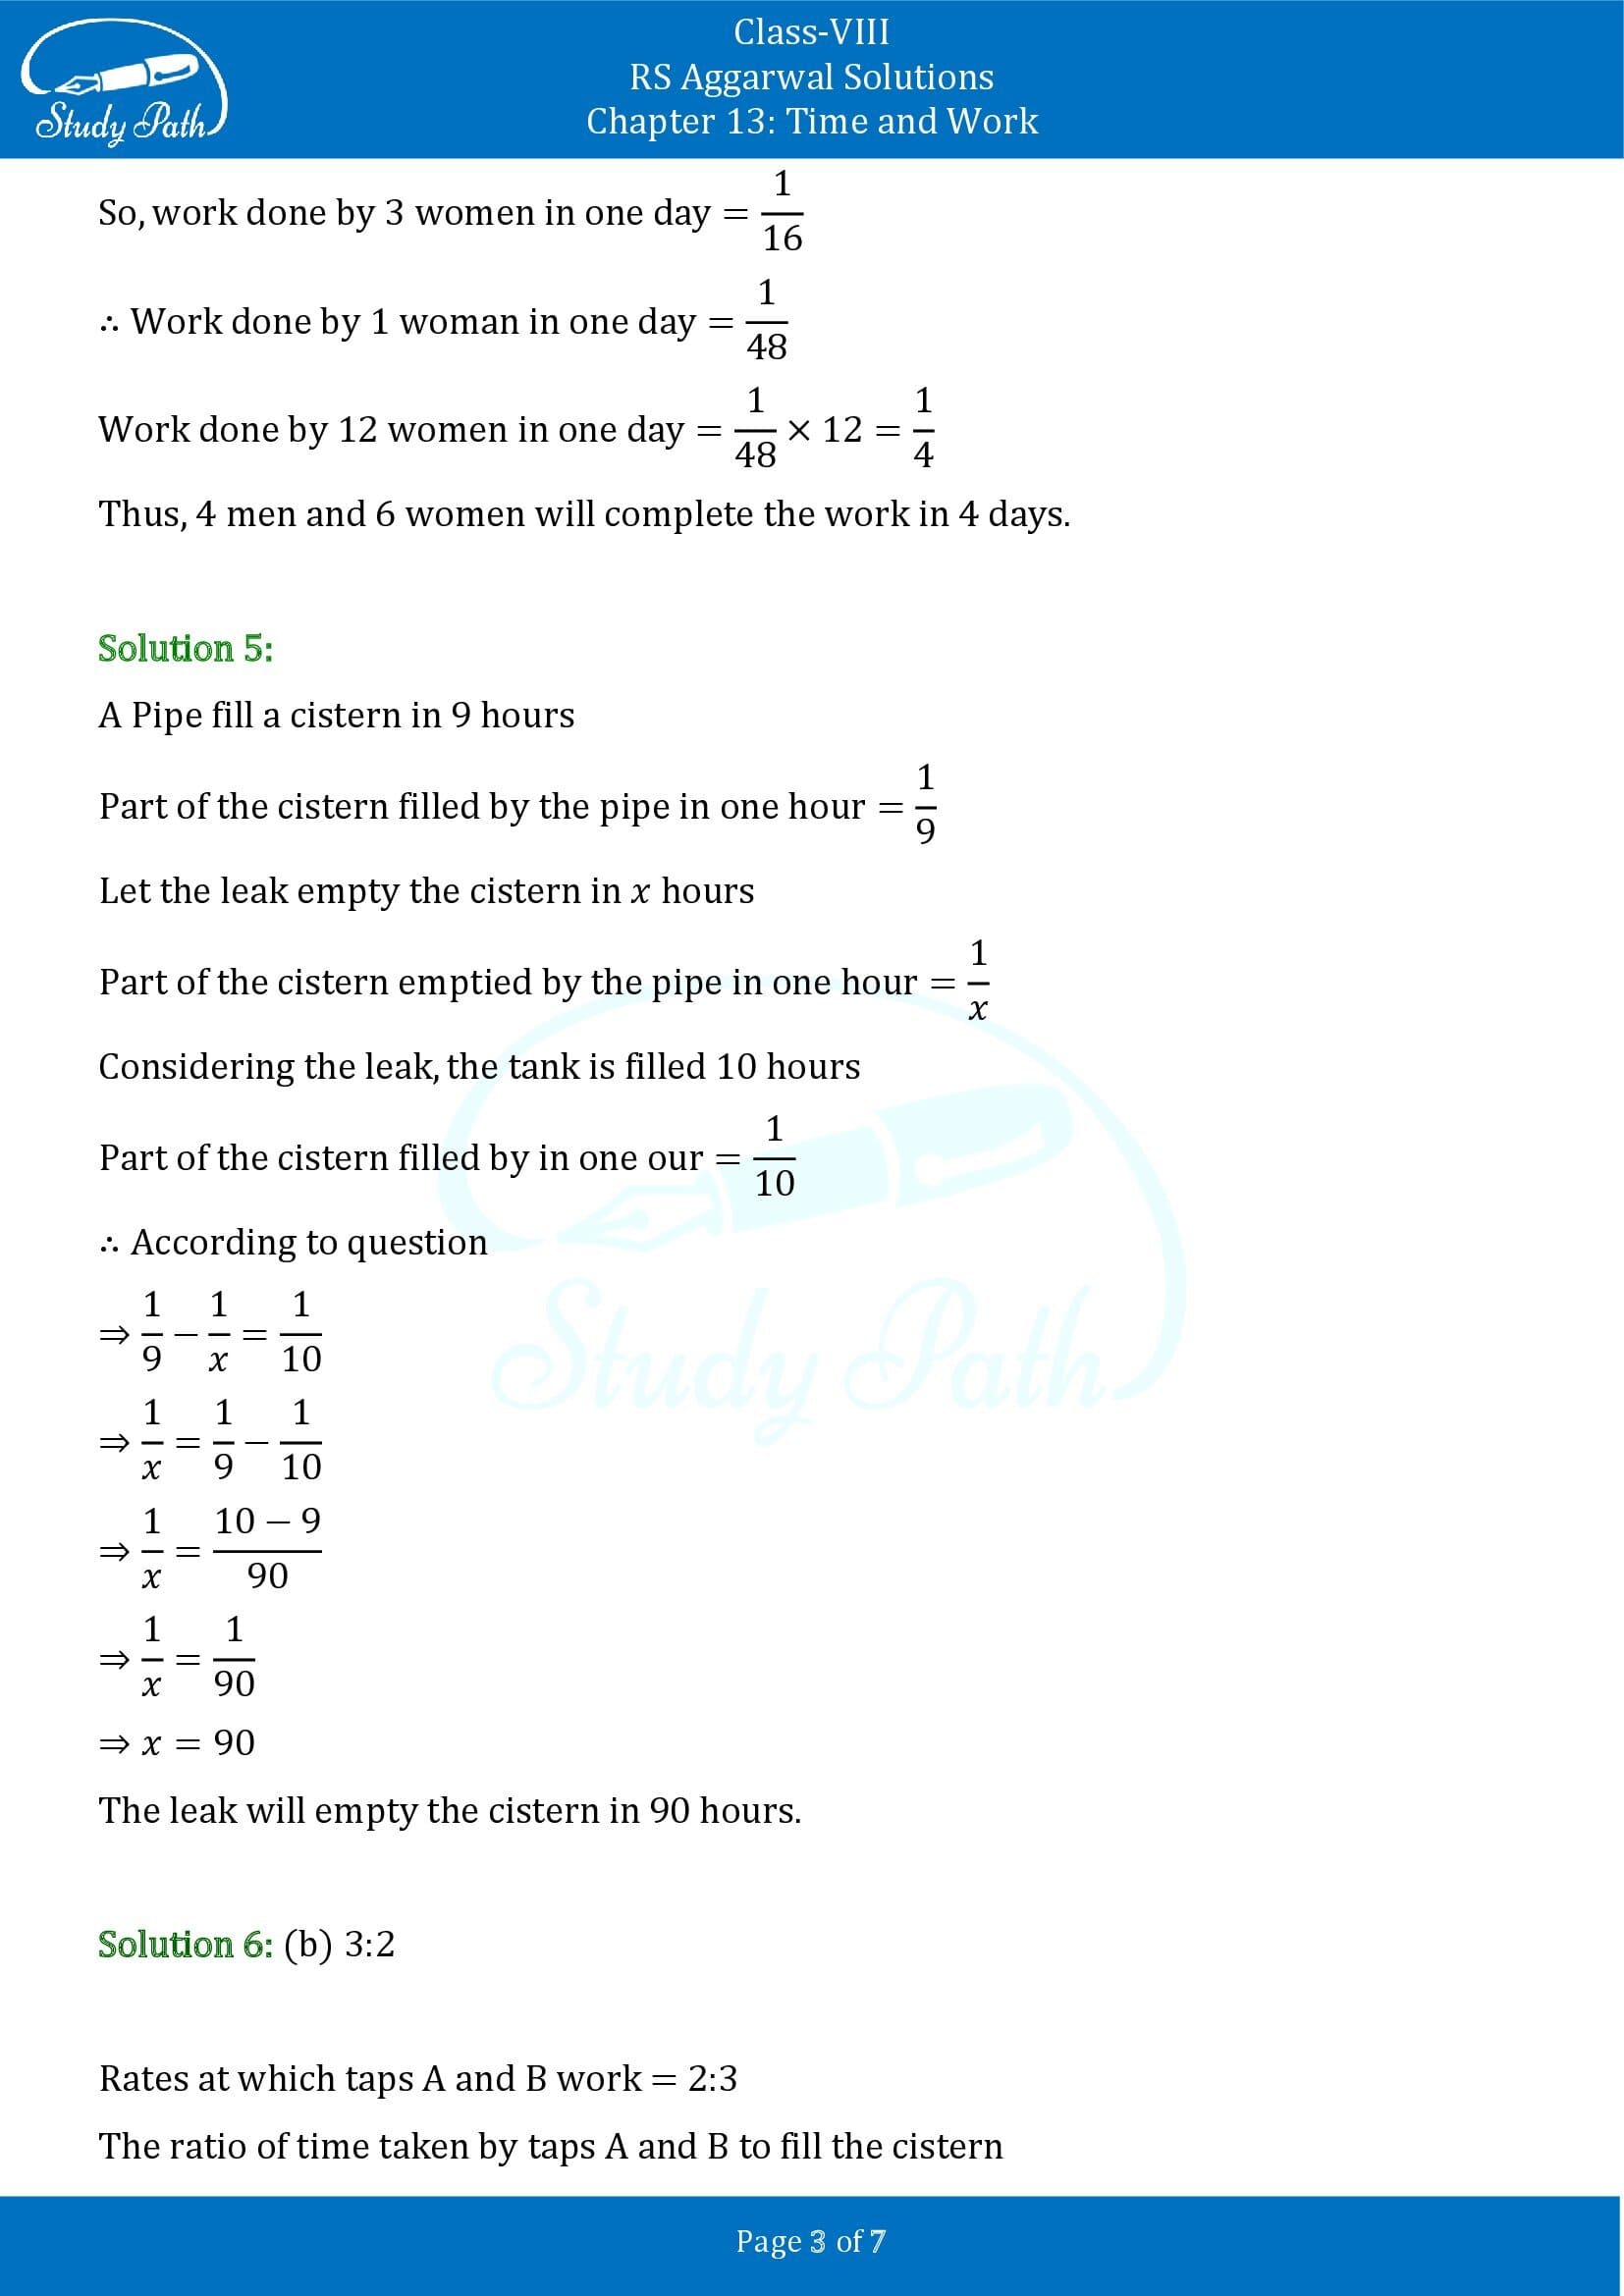 RS Aggarwal Solutions Class 8 Chapter 13 Time and Work Test Paper 00003